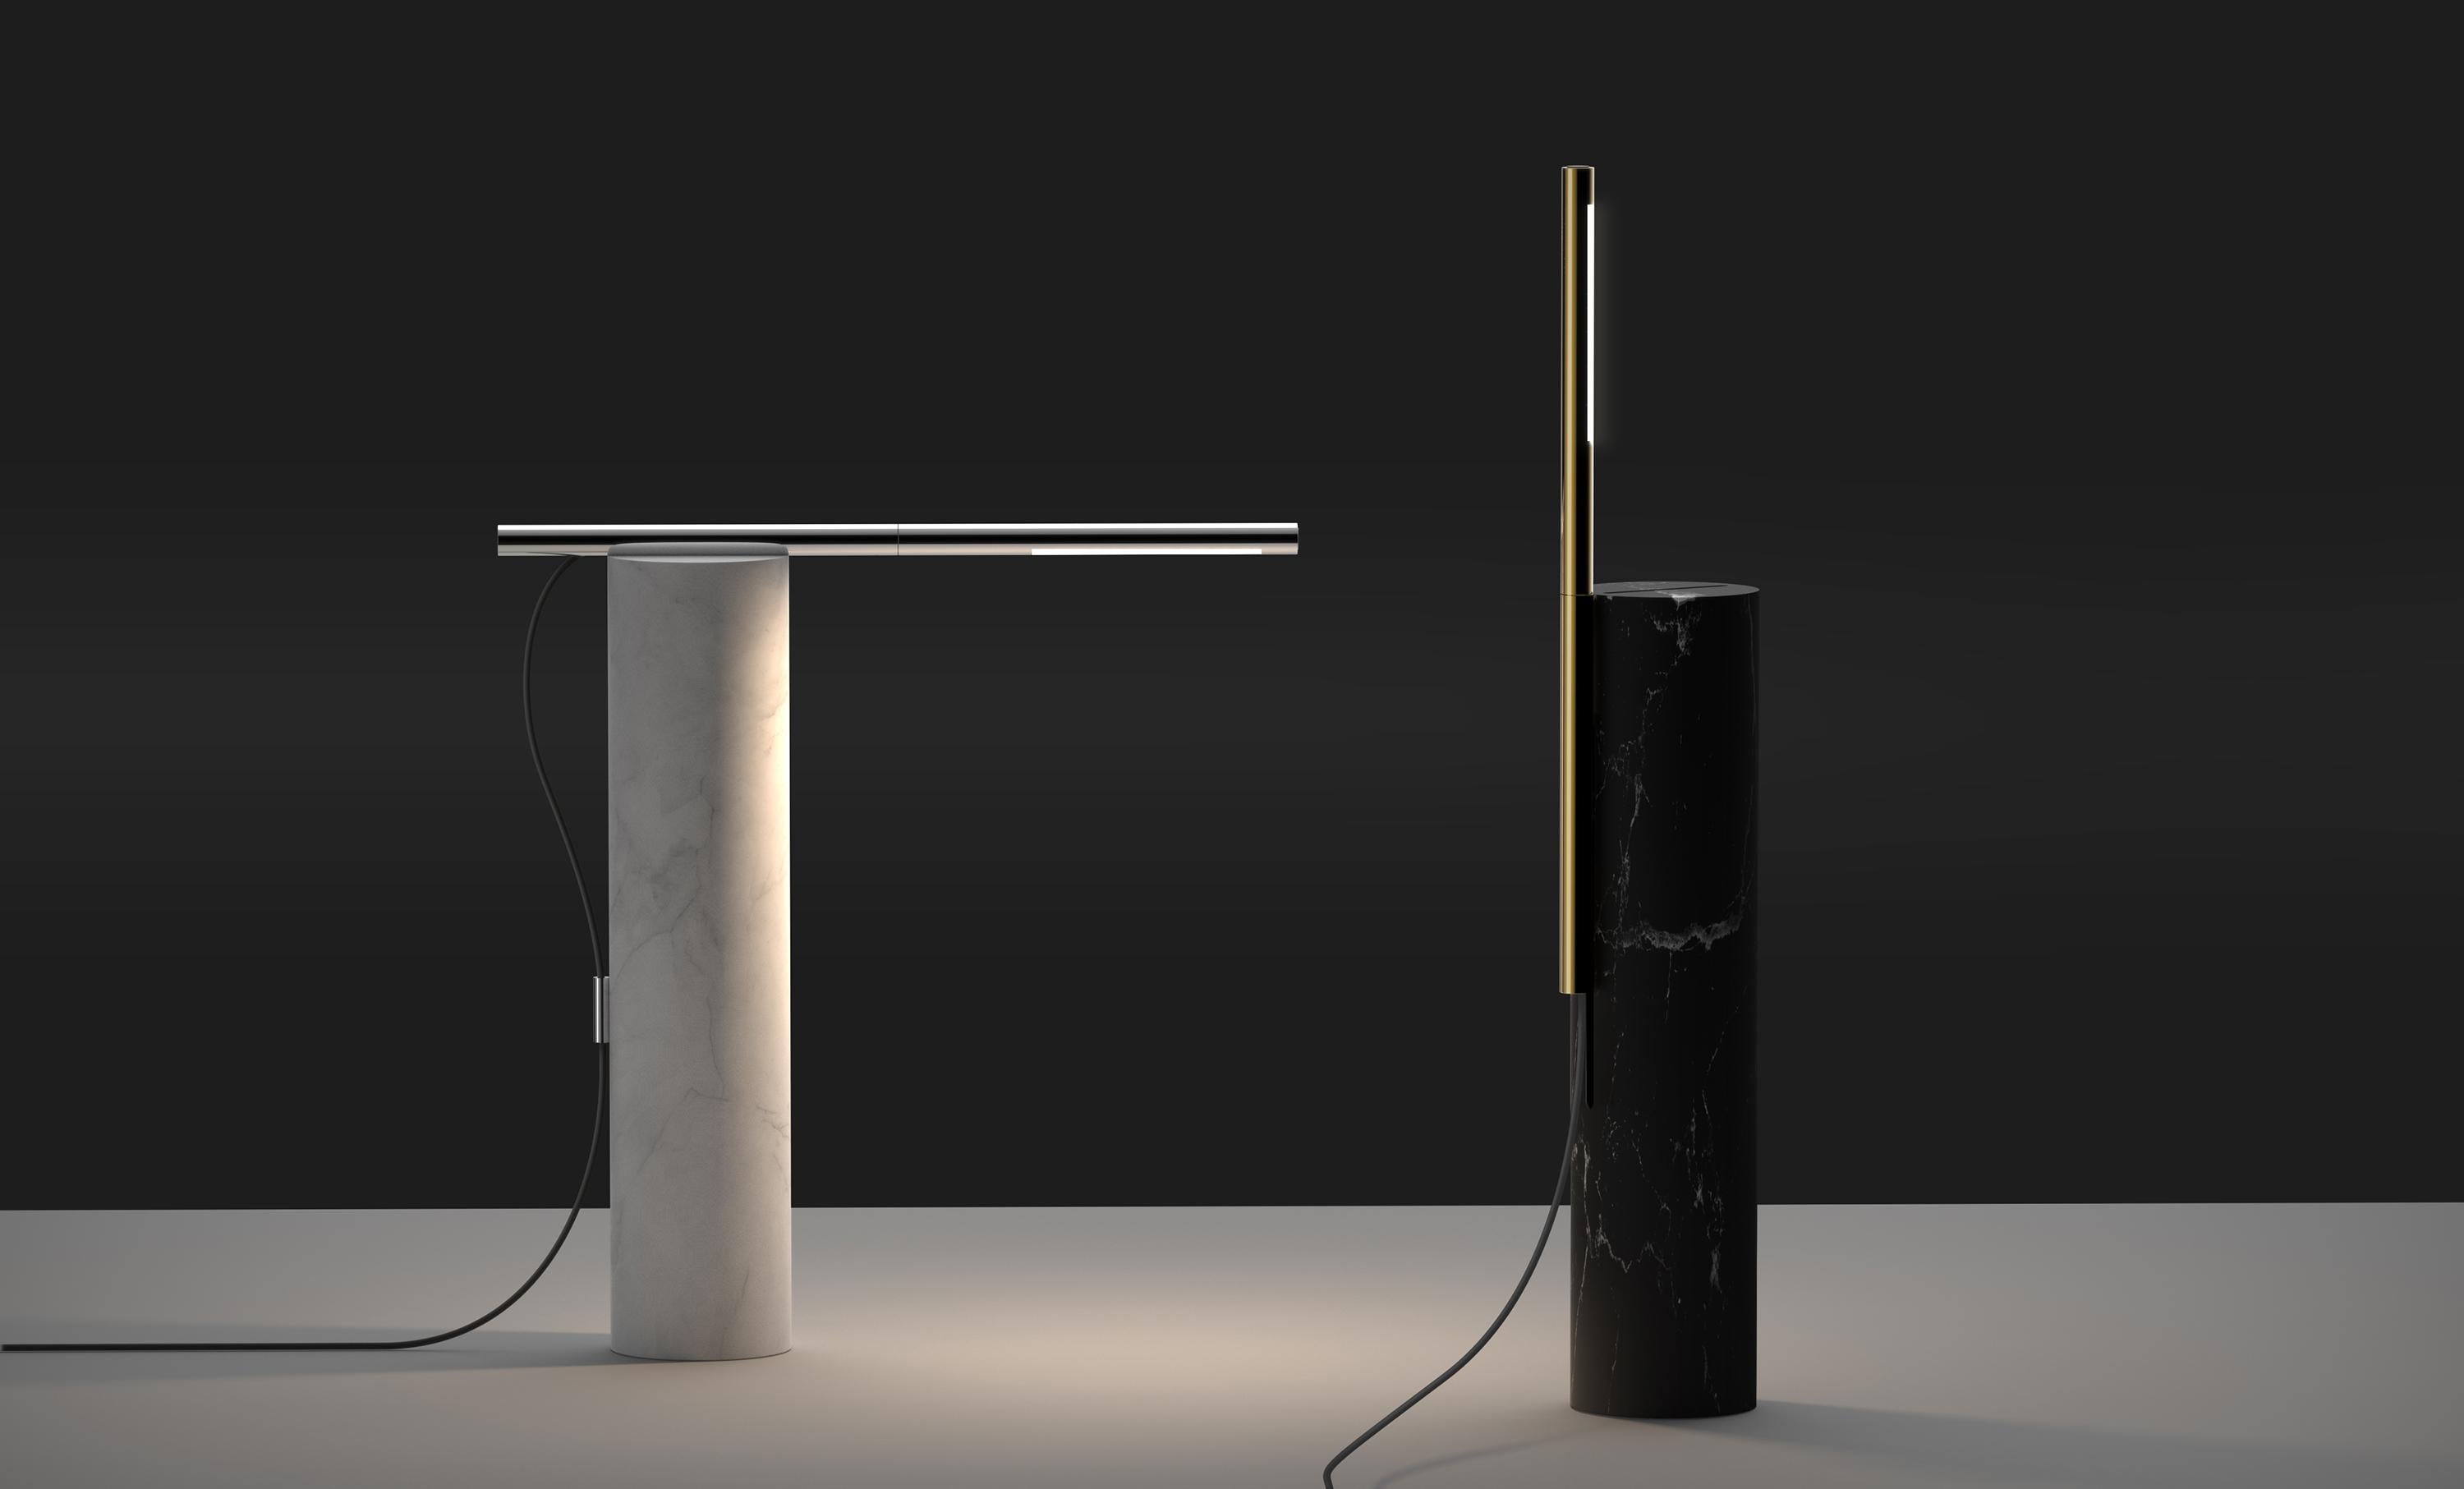 T.O celebrates and reinforces the importance of light as a pillar in our daily life. A monolithic column stands to support a horizontal and vertical line of light to provide precise light control in all directions. T.O embodies a harmonious dialogue